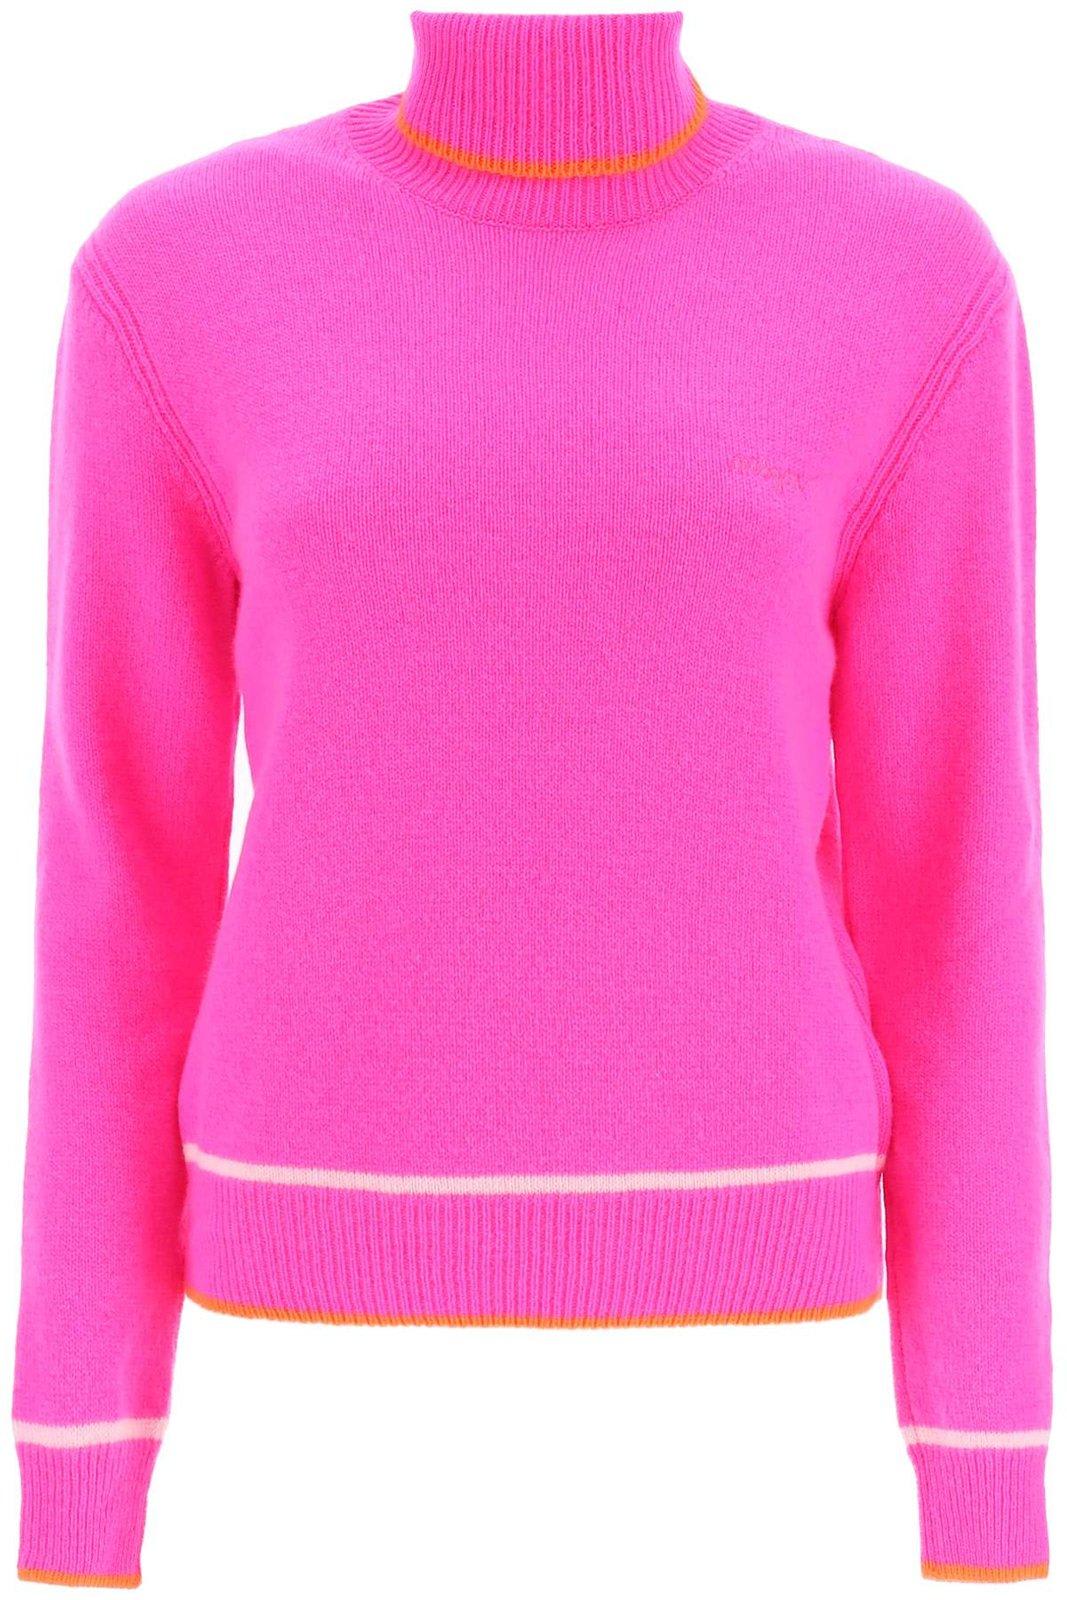 MSGM Roll Neck Long Sleeved Knitted Jumper